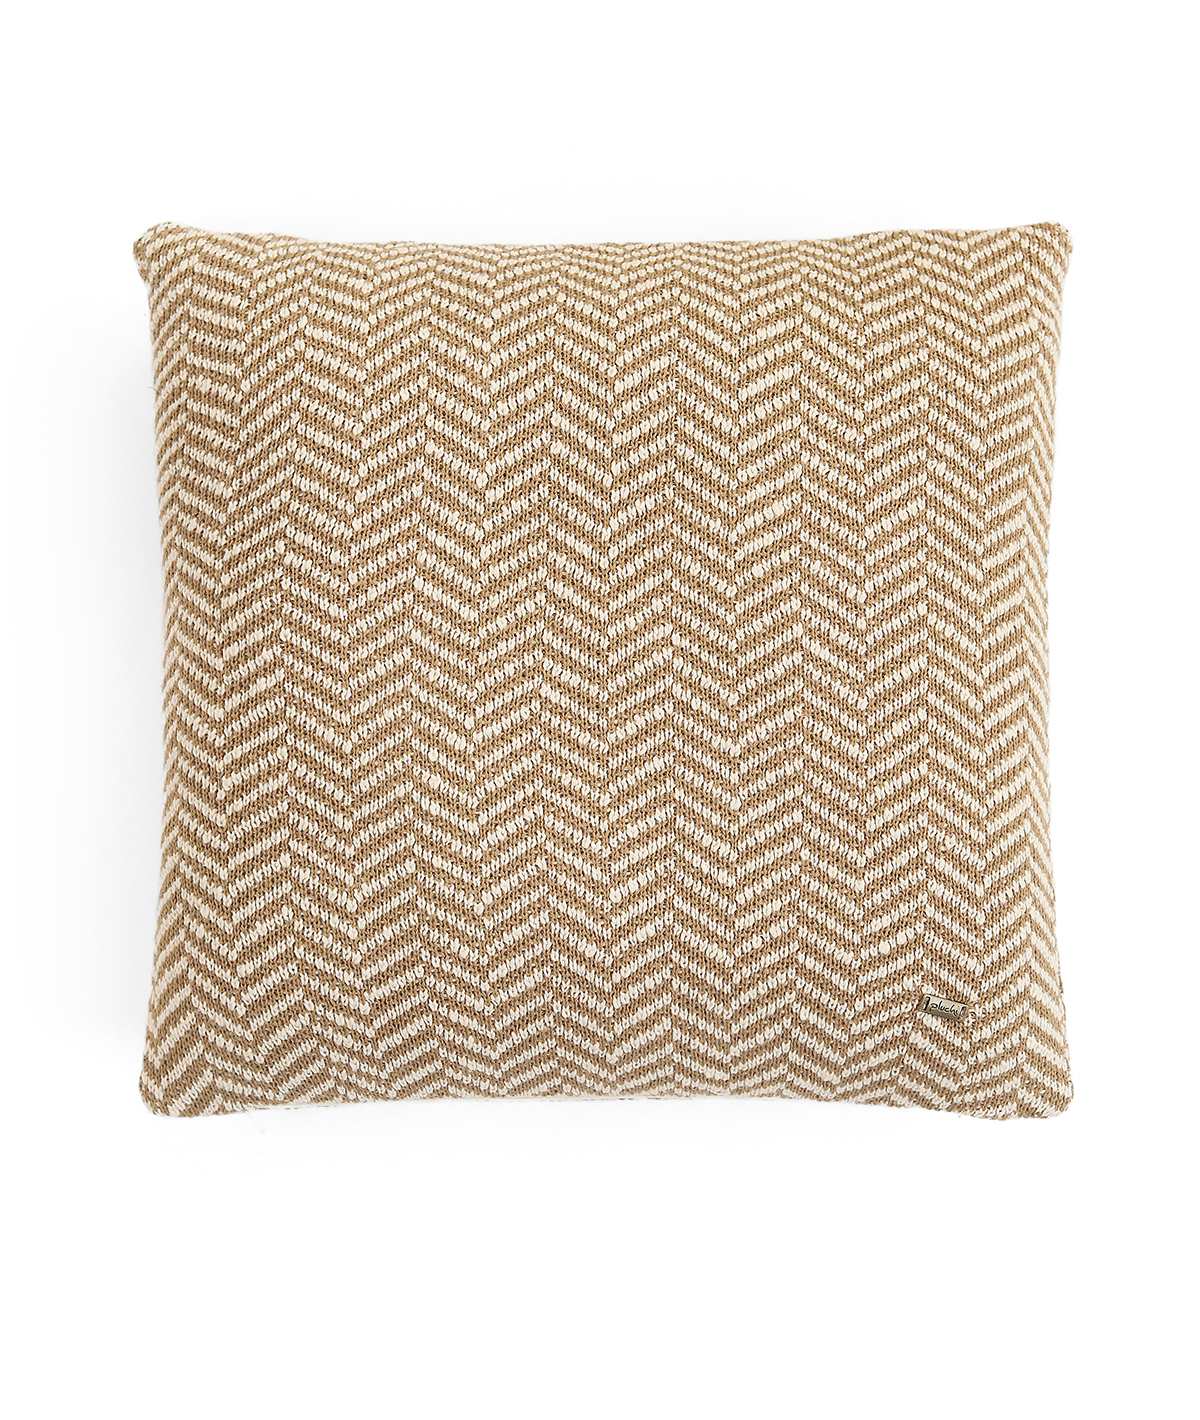 Herringbone Cotton Knitted Decorative Khaki & Natural Color 18 x 18 Inches Cushion Cover